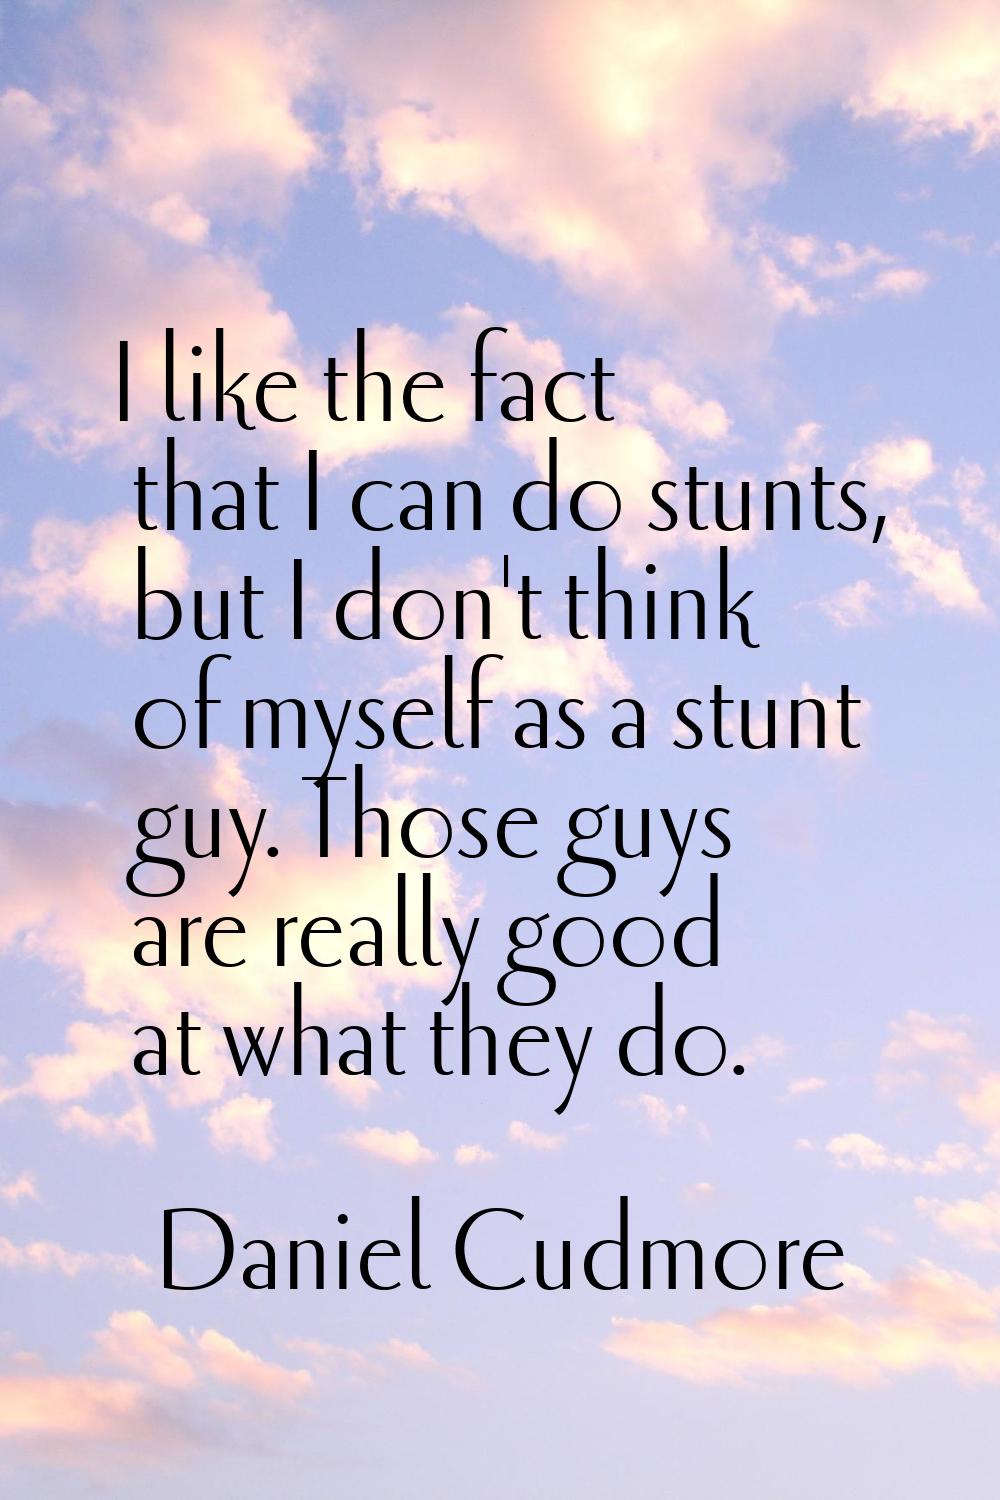 I like the fact that I can do stunts, but I don't think of myself as a stunt guy. Those guys are re